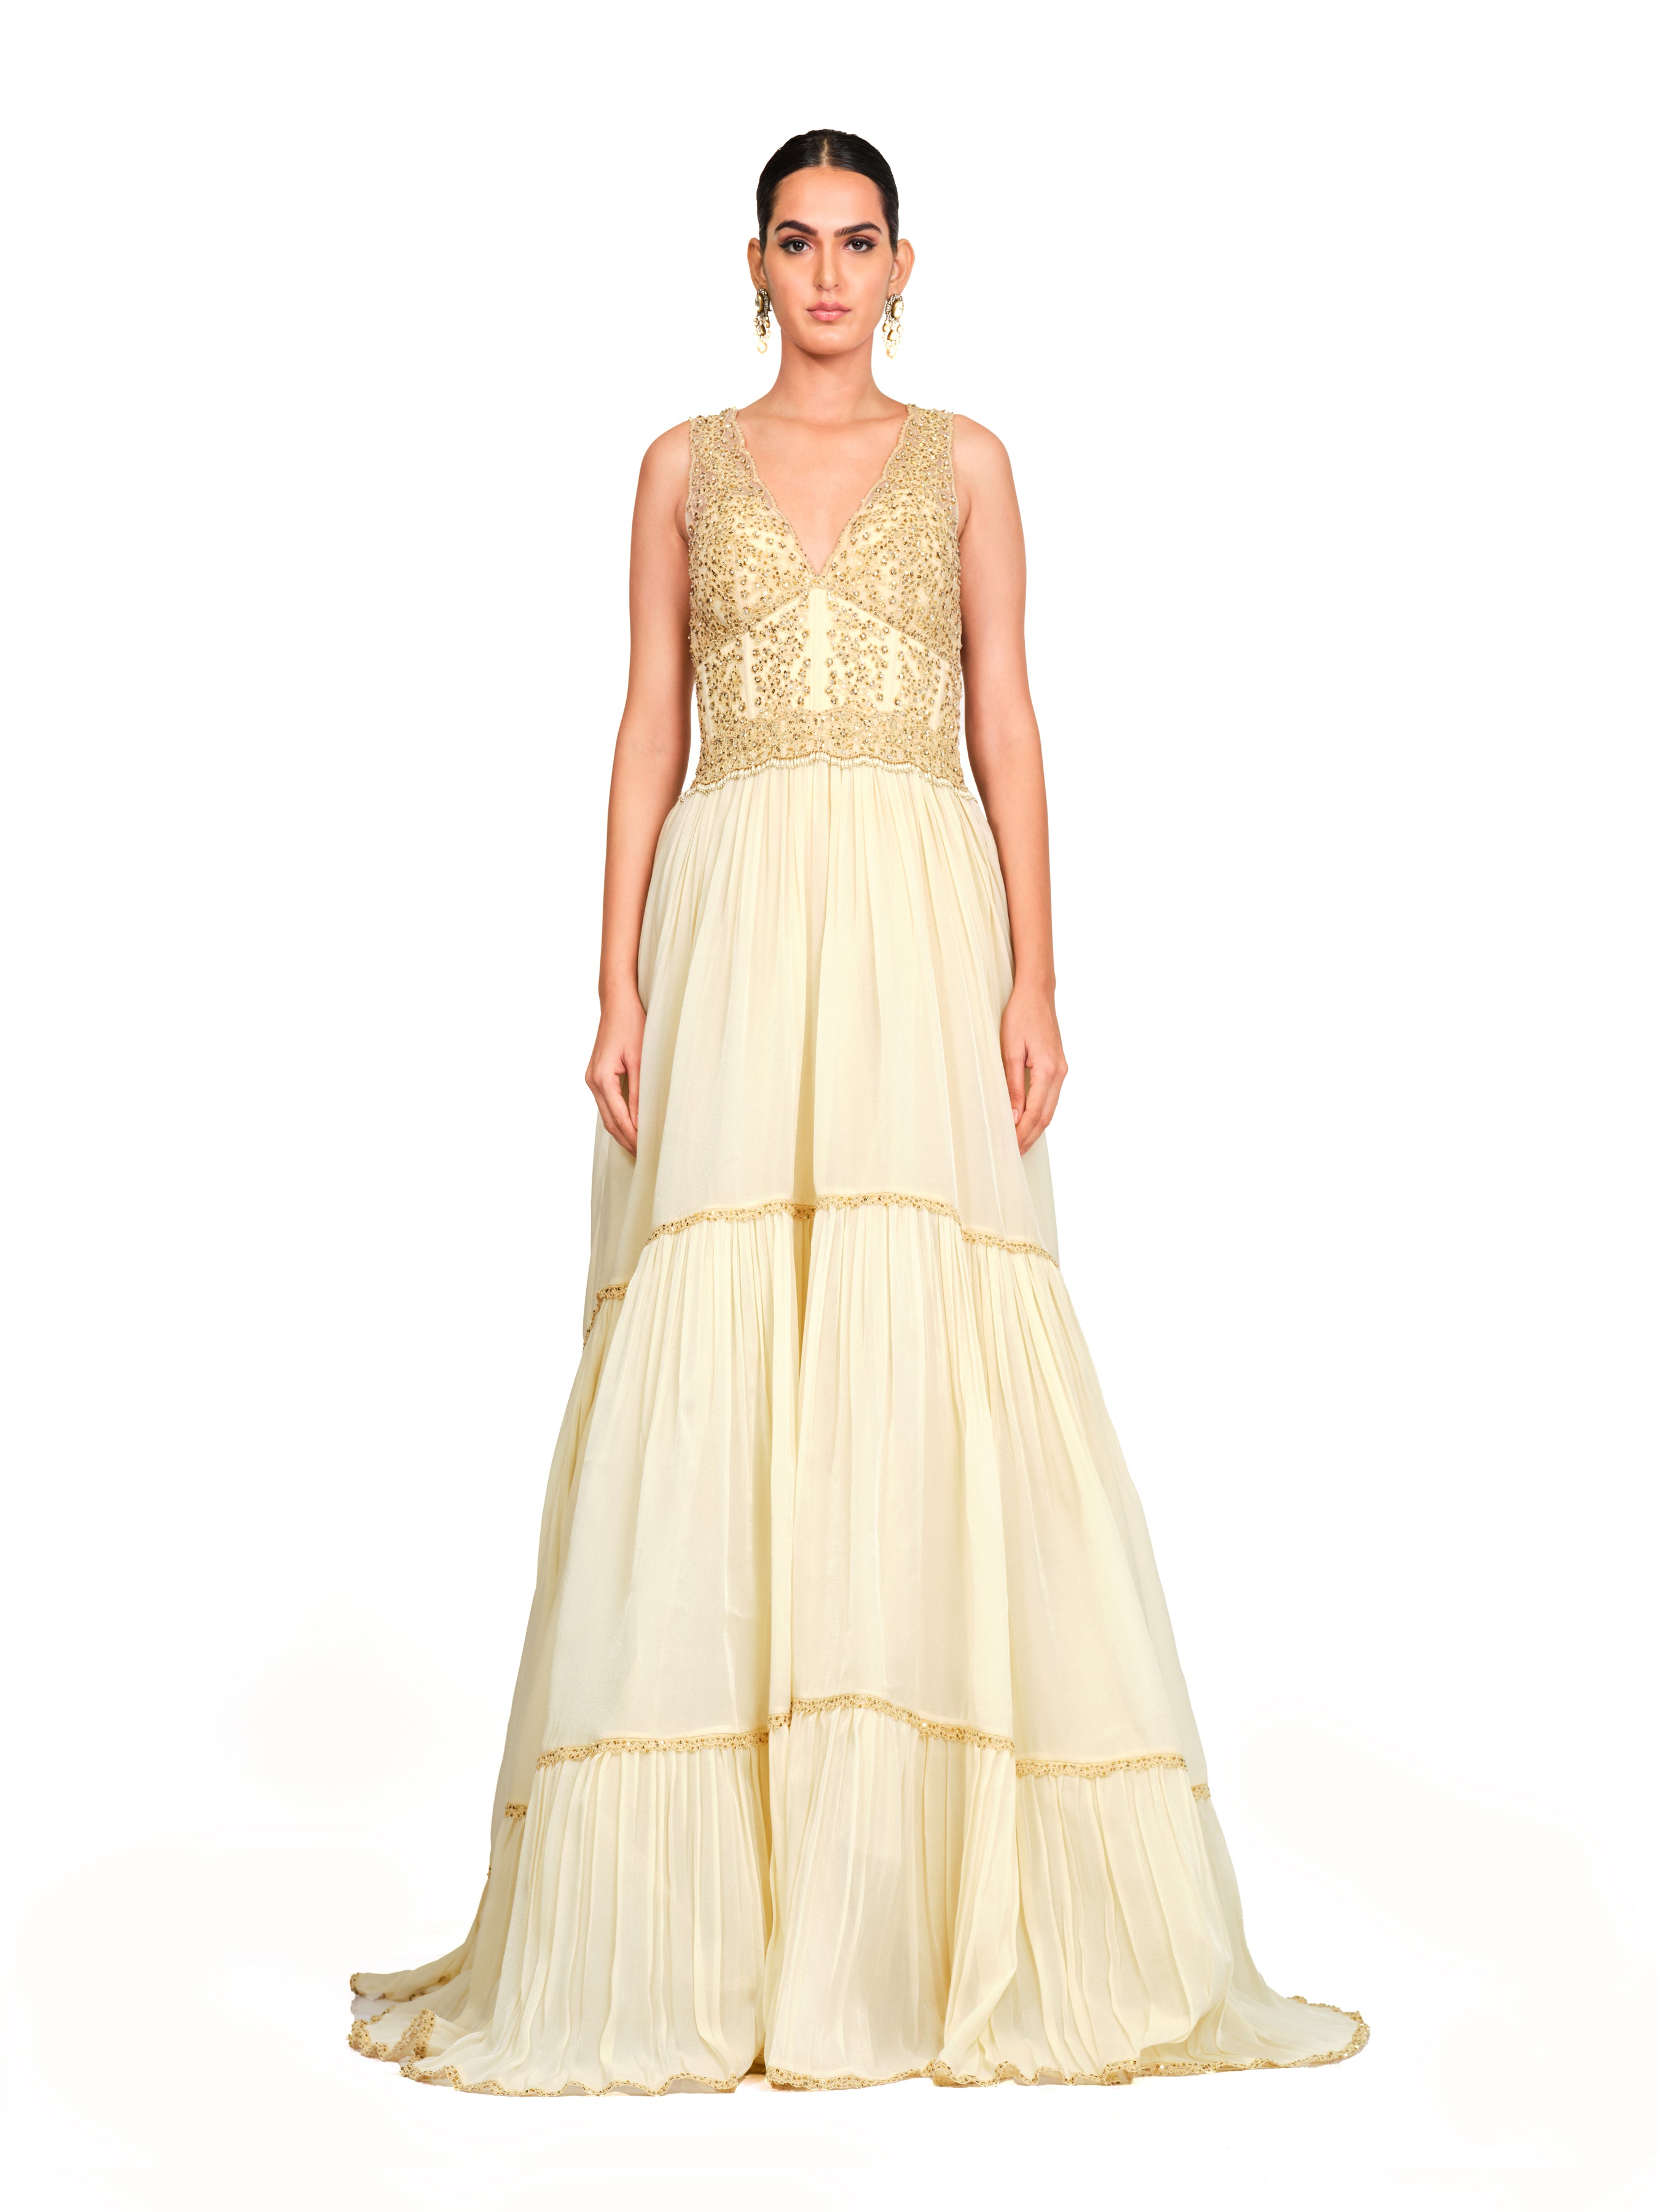 Flared Sleeveless Gown With Signature Cord-Work And Sequins Detailing